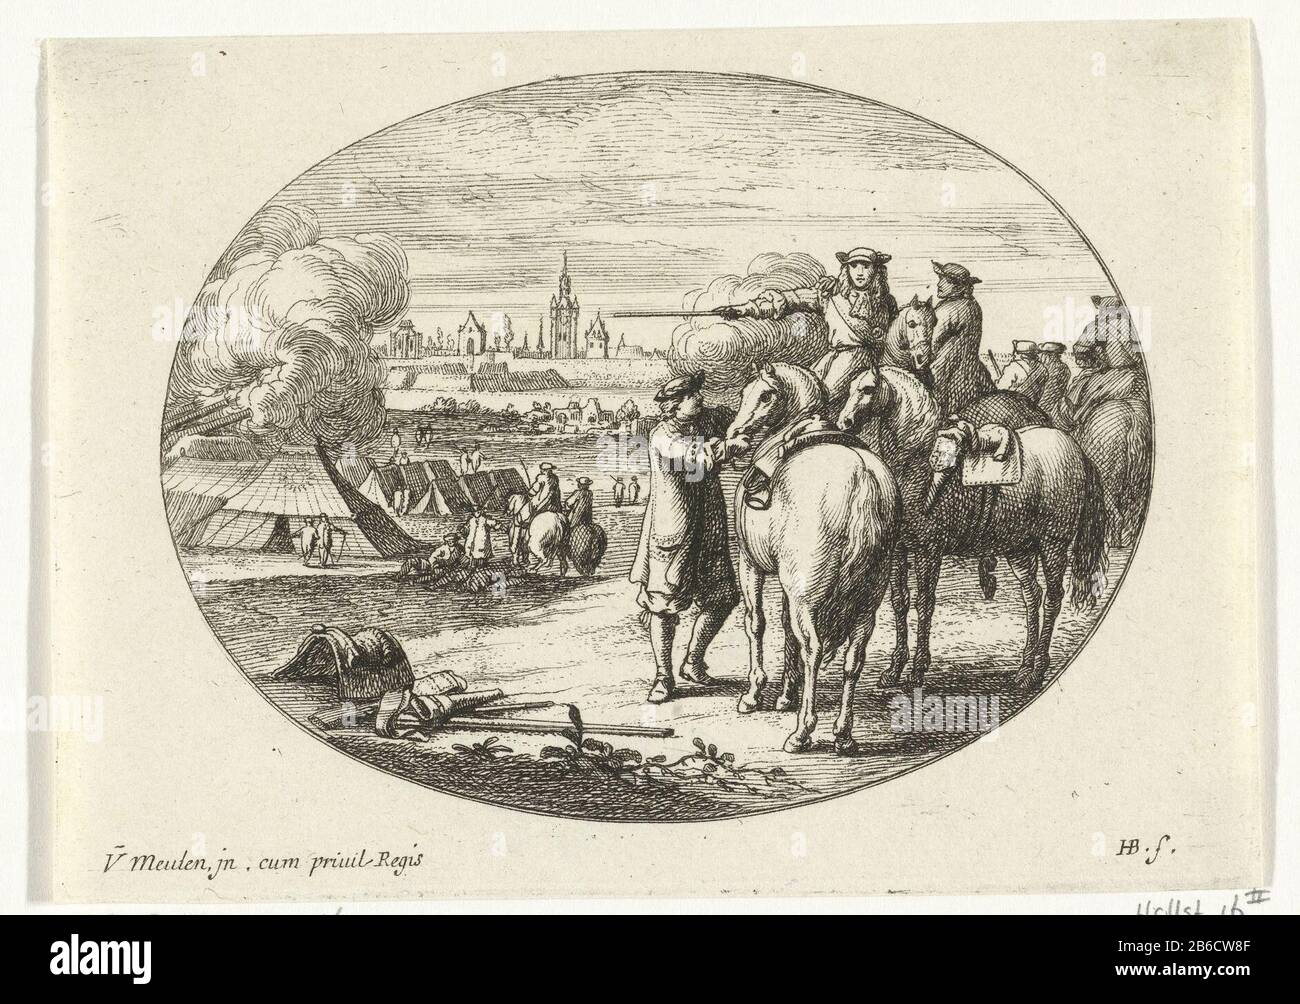 Siege of a city military scenes from the life of Louis XIV, king of France  (series title) Right riders and horses, one rider points. Left a camp, guns  and on the horizon